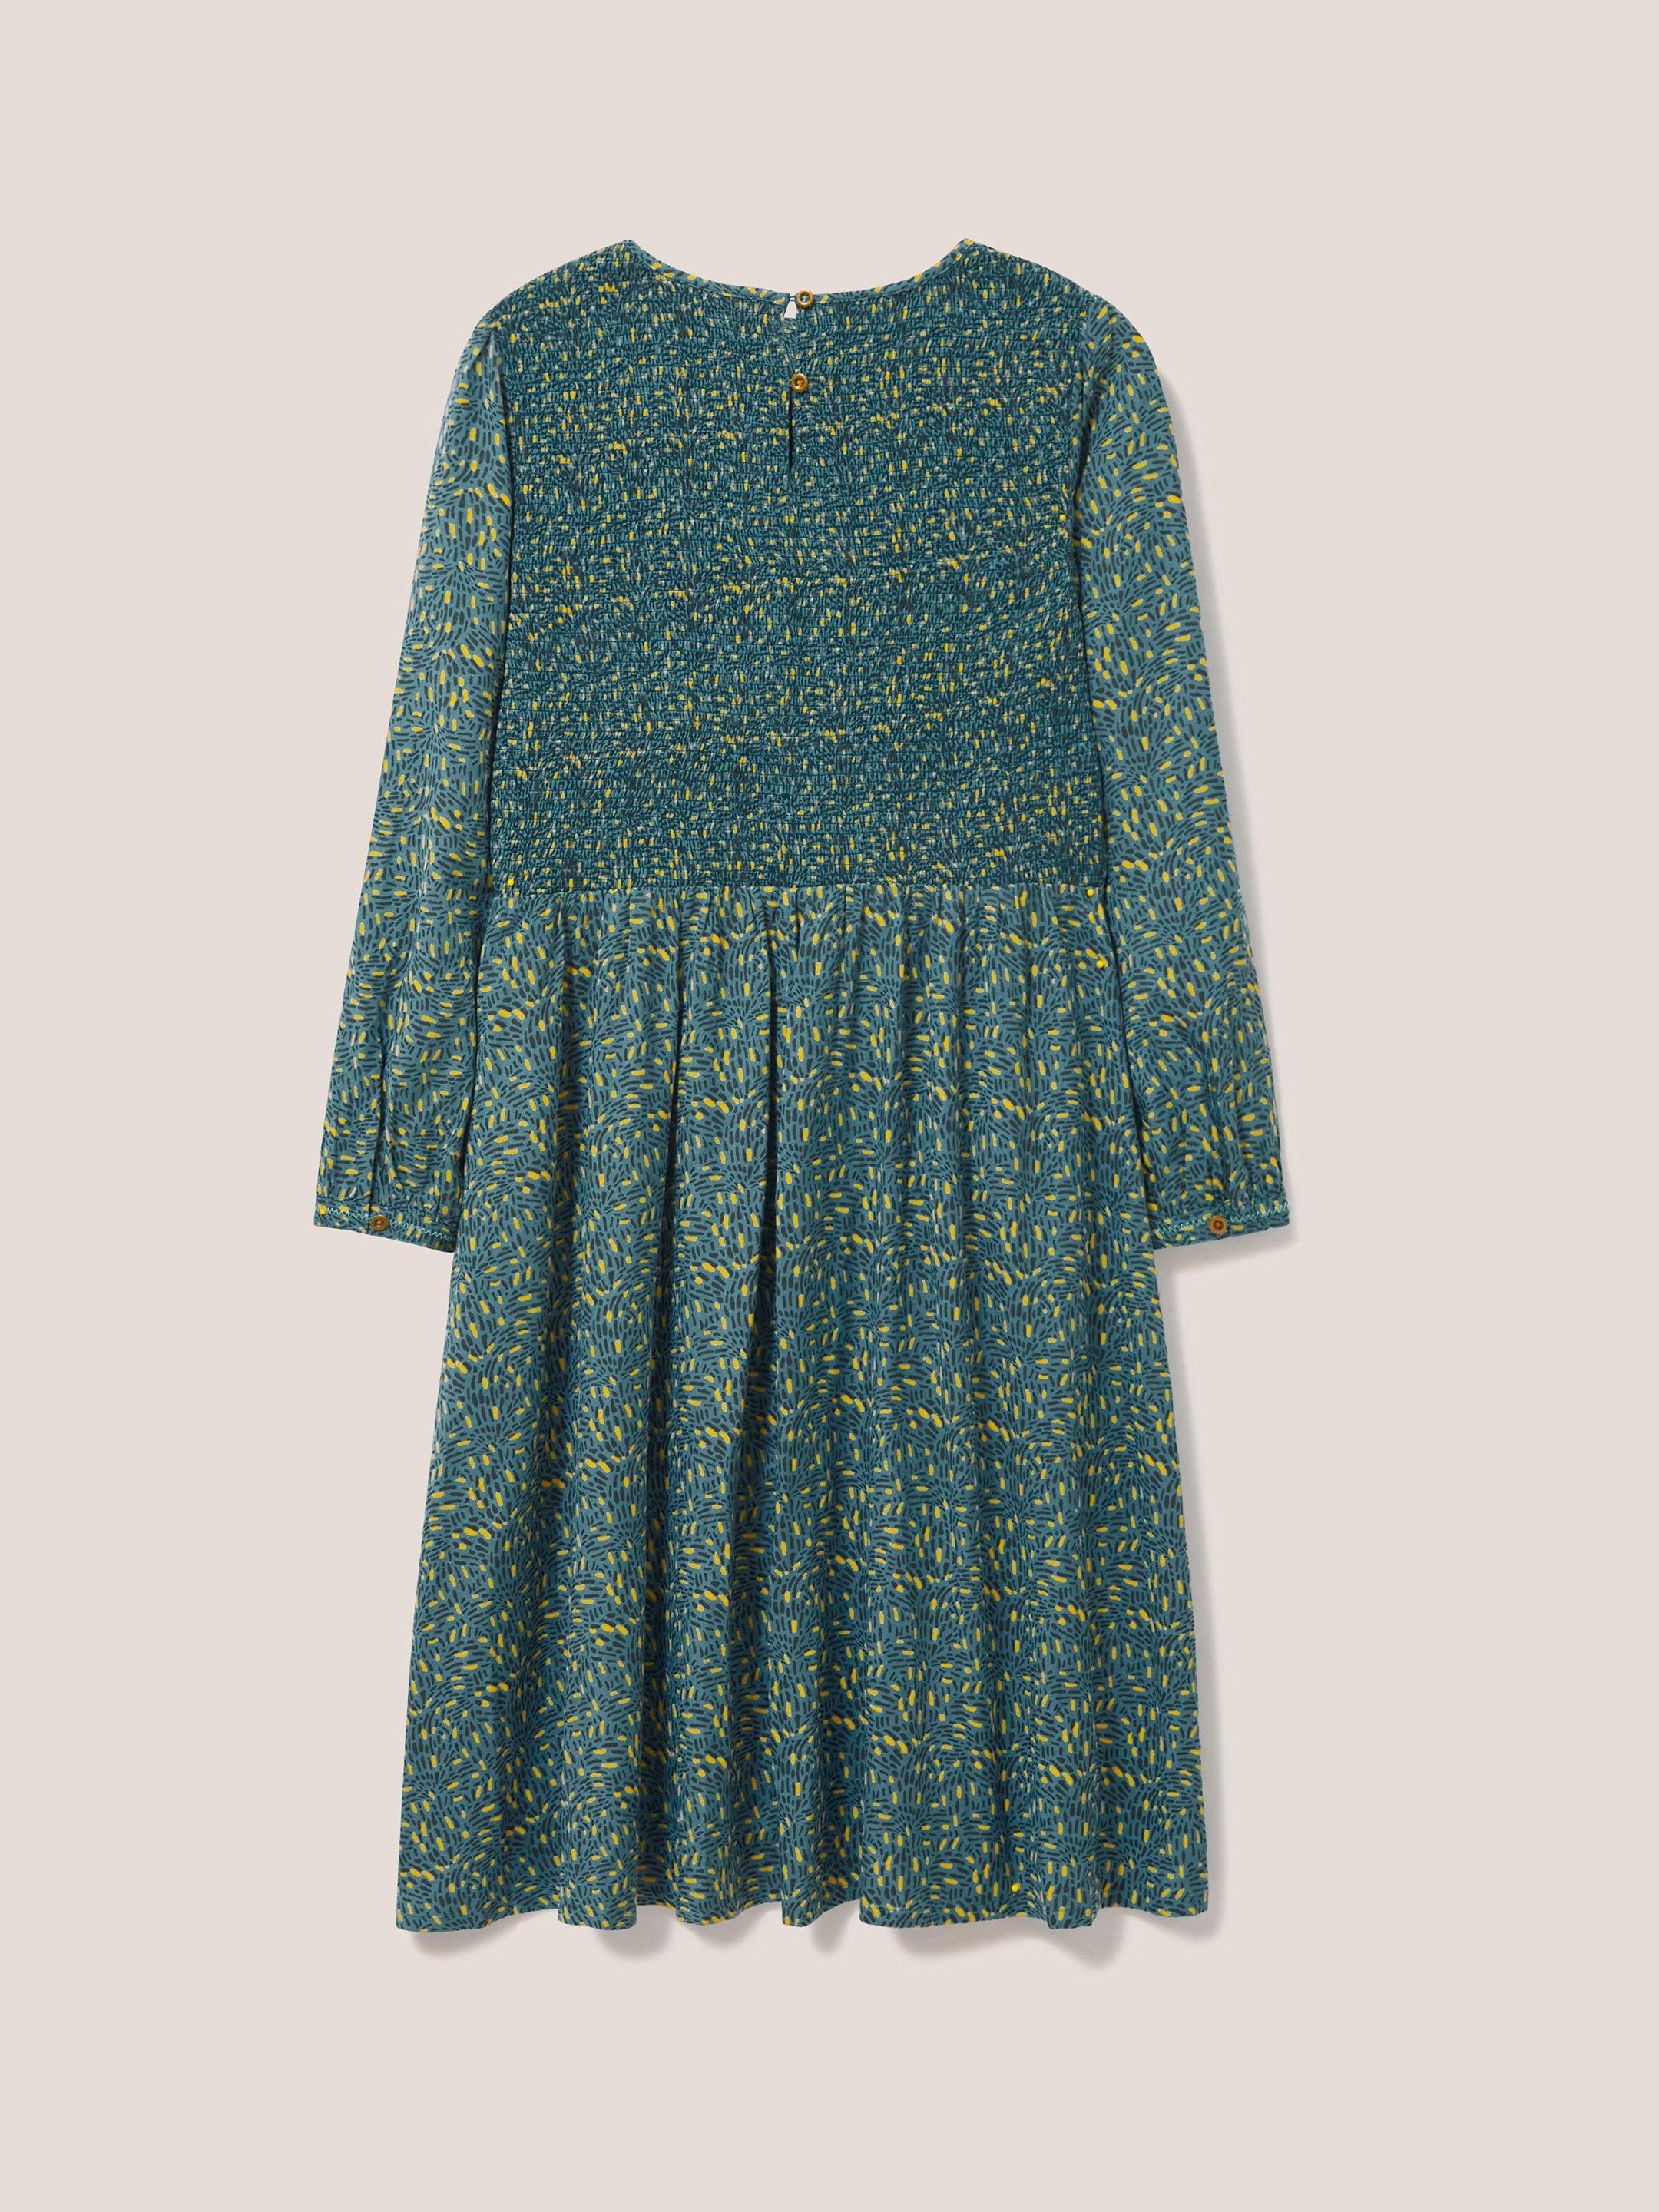 Aneth Eco Vero Shirred Dress in TEAL PR - FLAT BACK